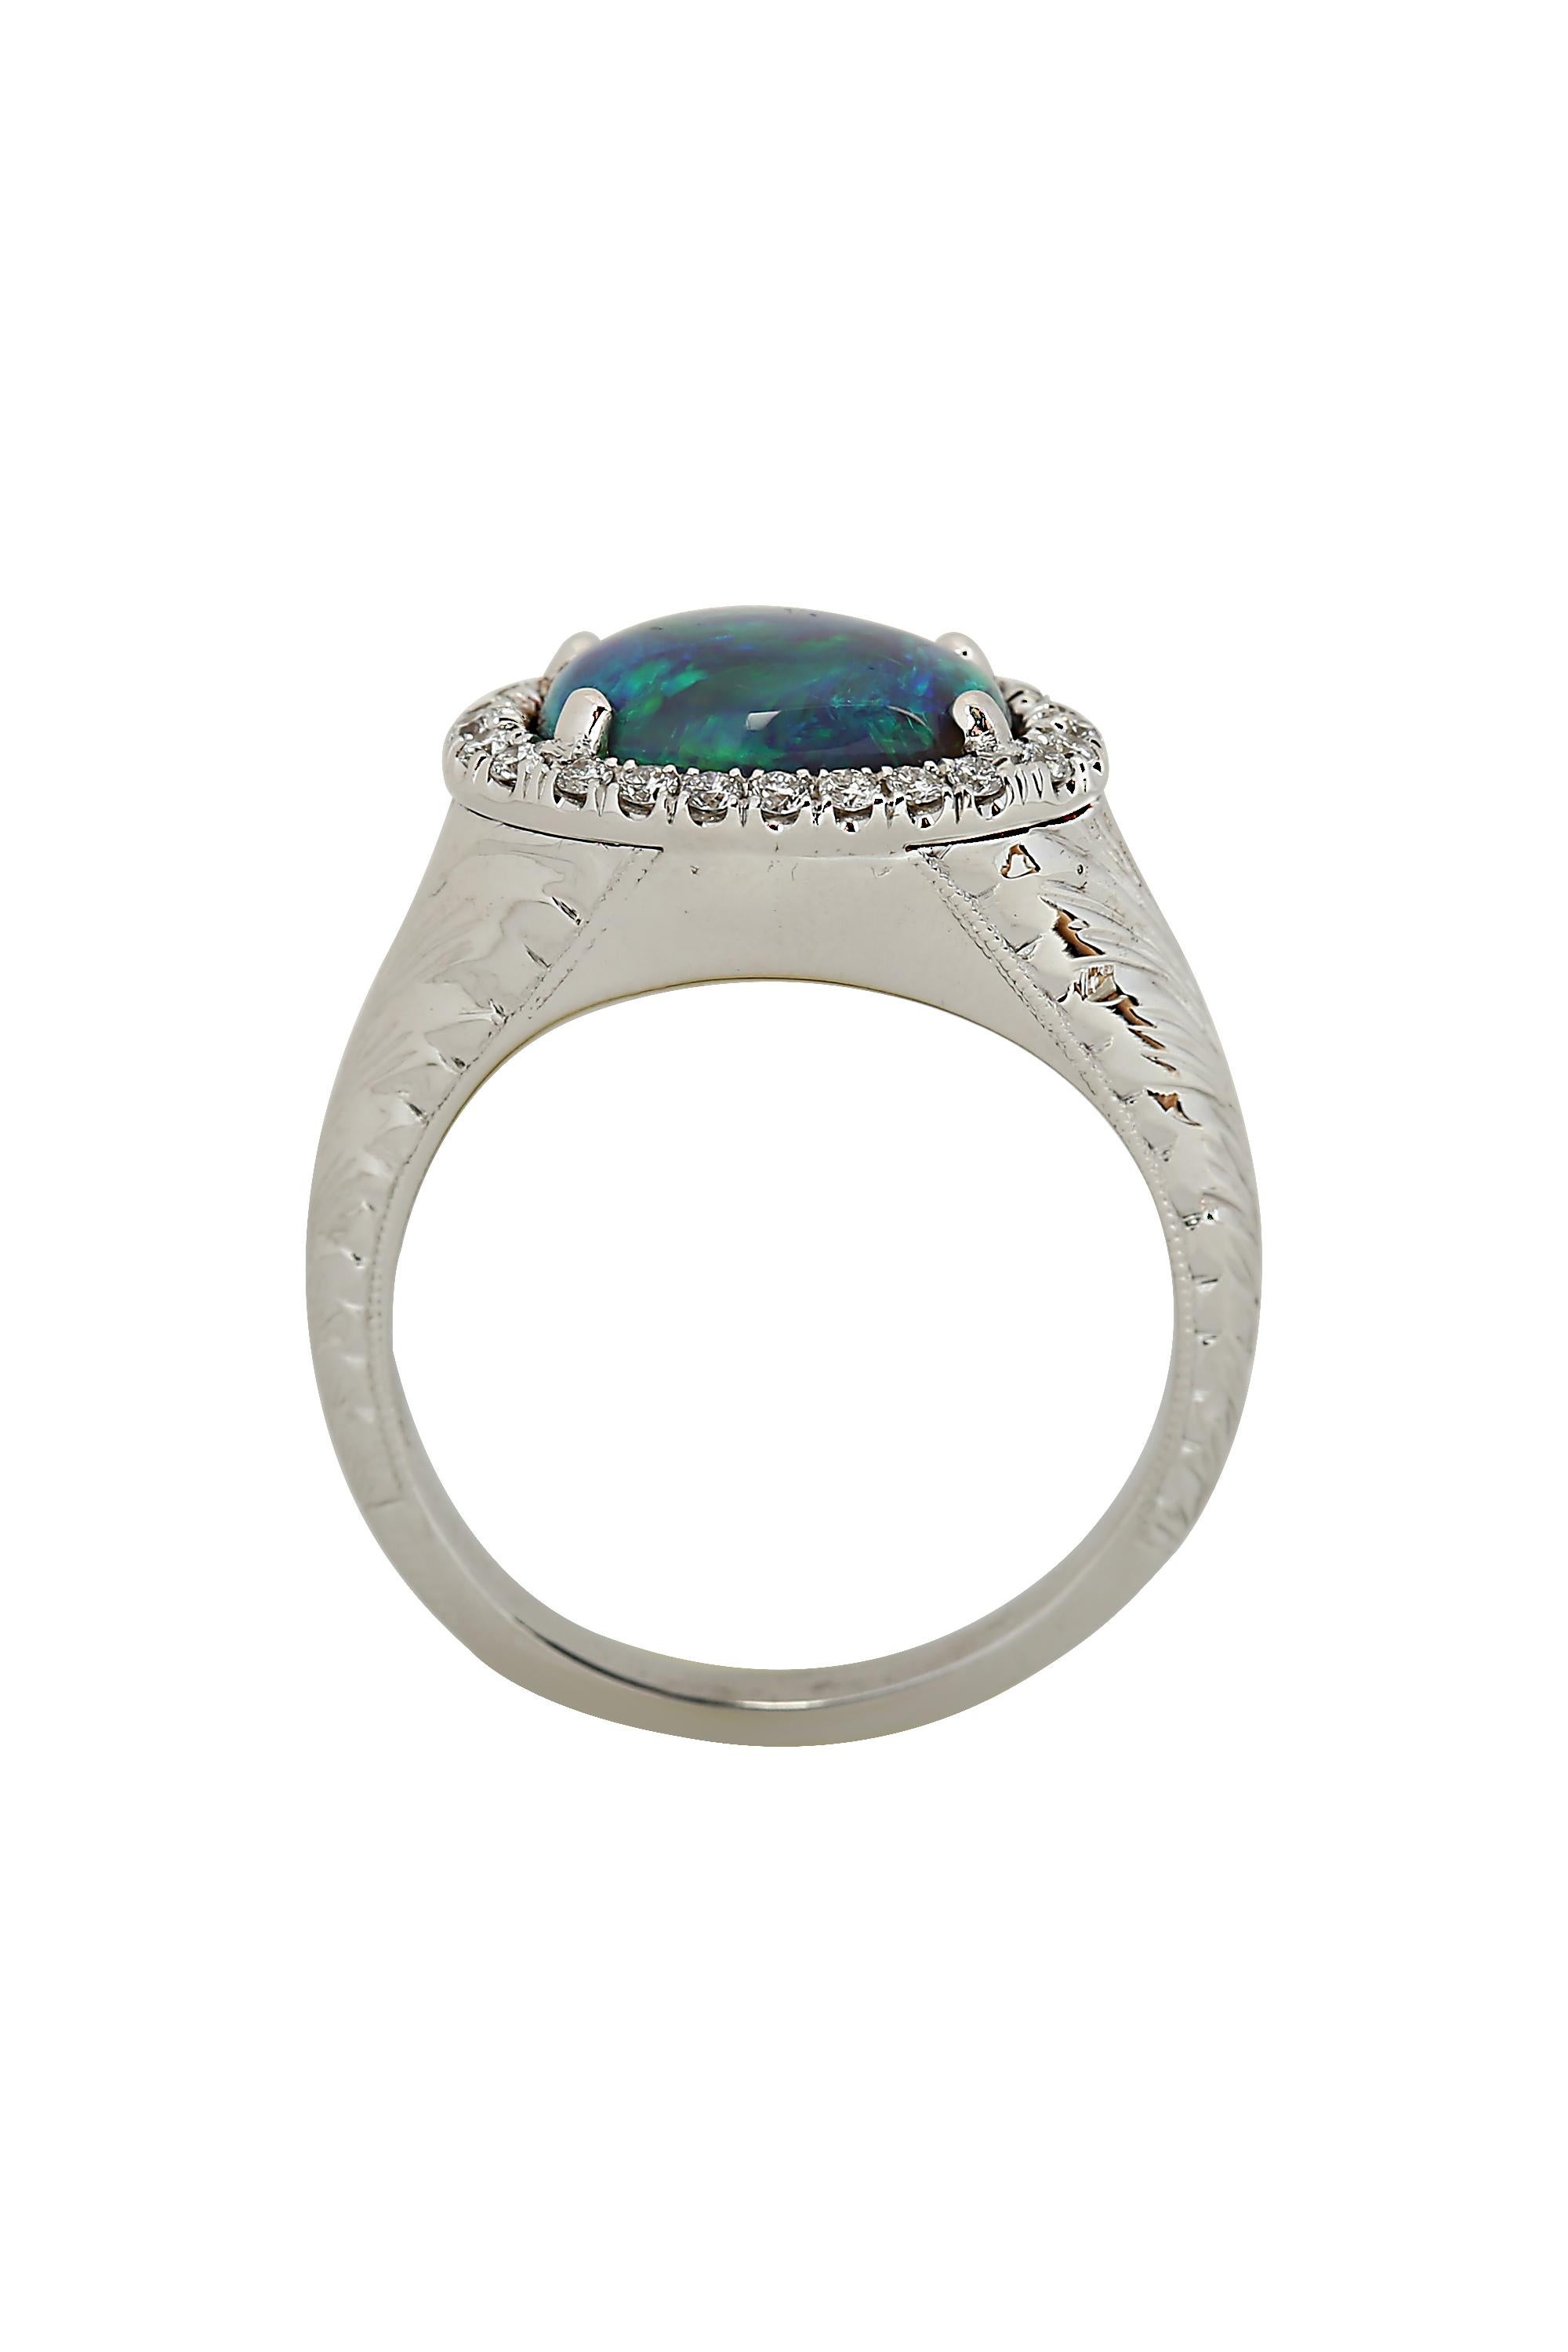 Art Deco Gems Are Forever 3.65 Carat Black Opal and Diamond Ring For Sale